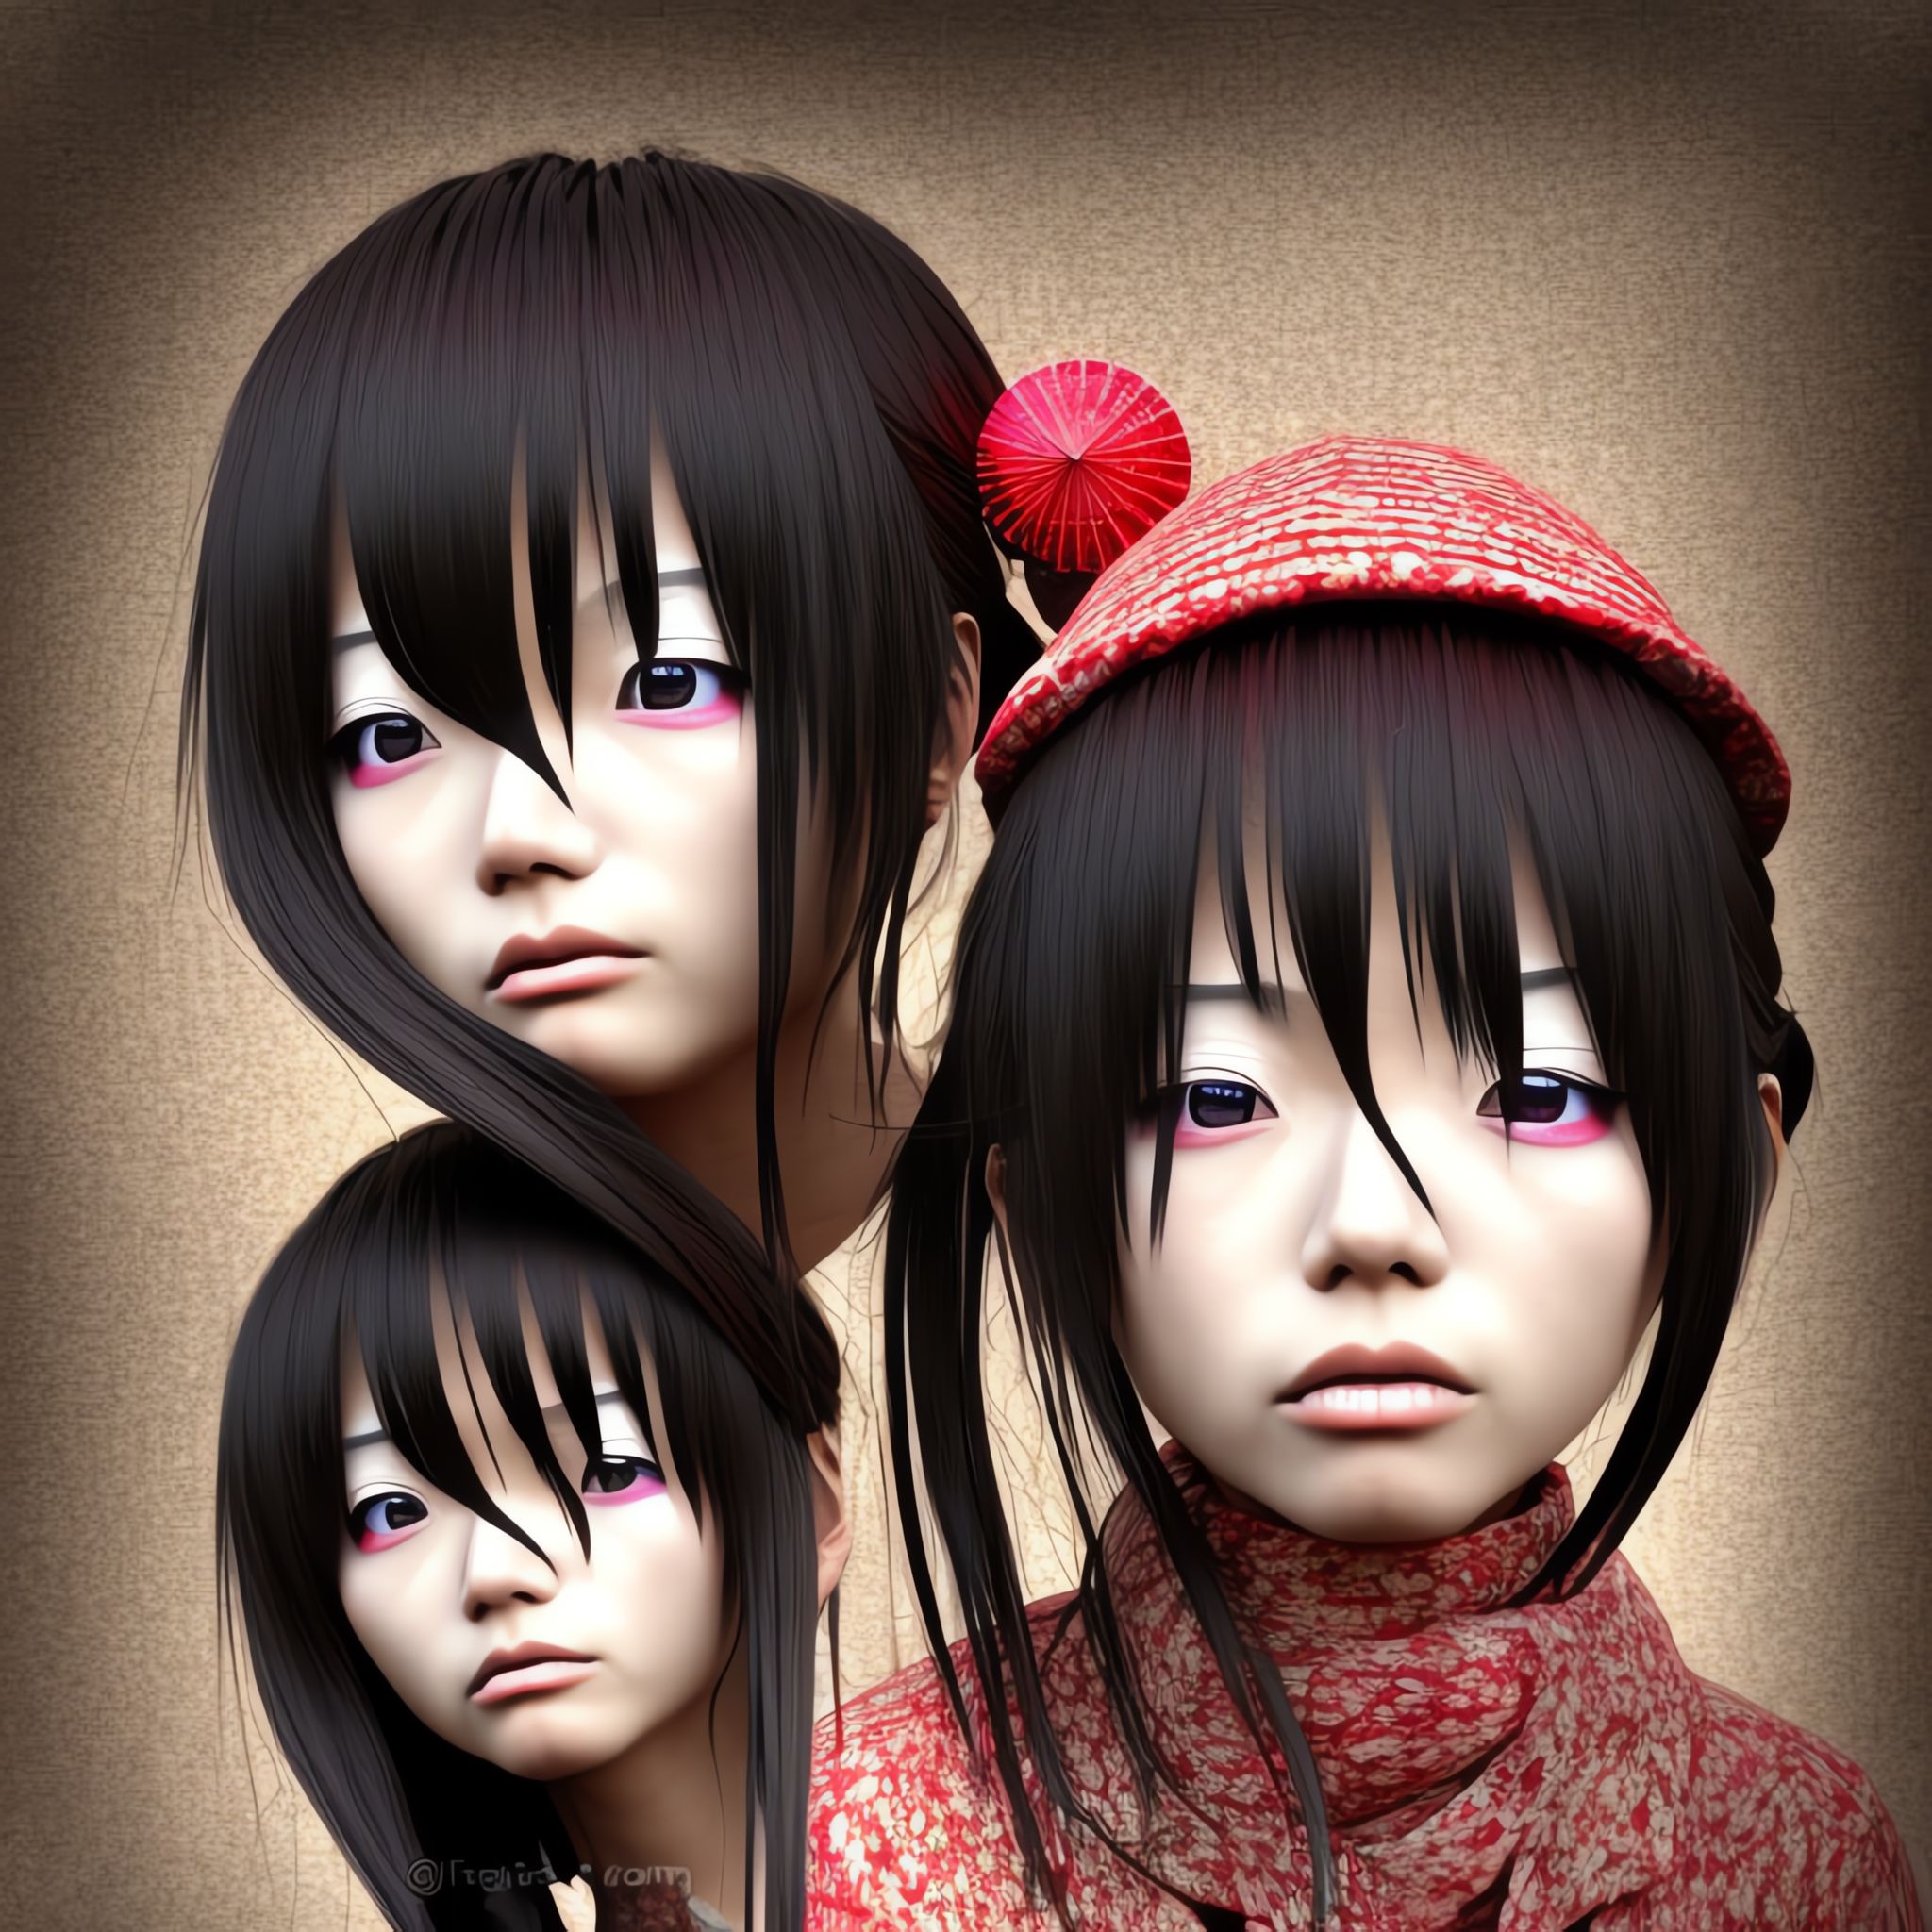 Melting-face-of-a-Japanese-girl-Manga-3d-cgi-art-lots-of-details-cute-Japanese-artwork-old-to-ts97